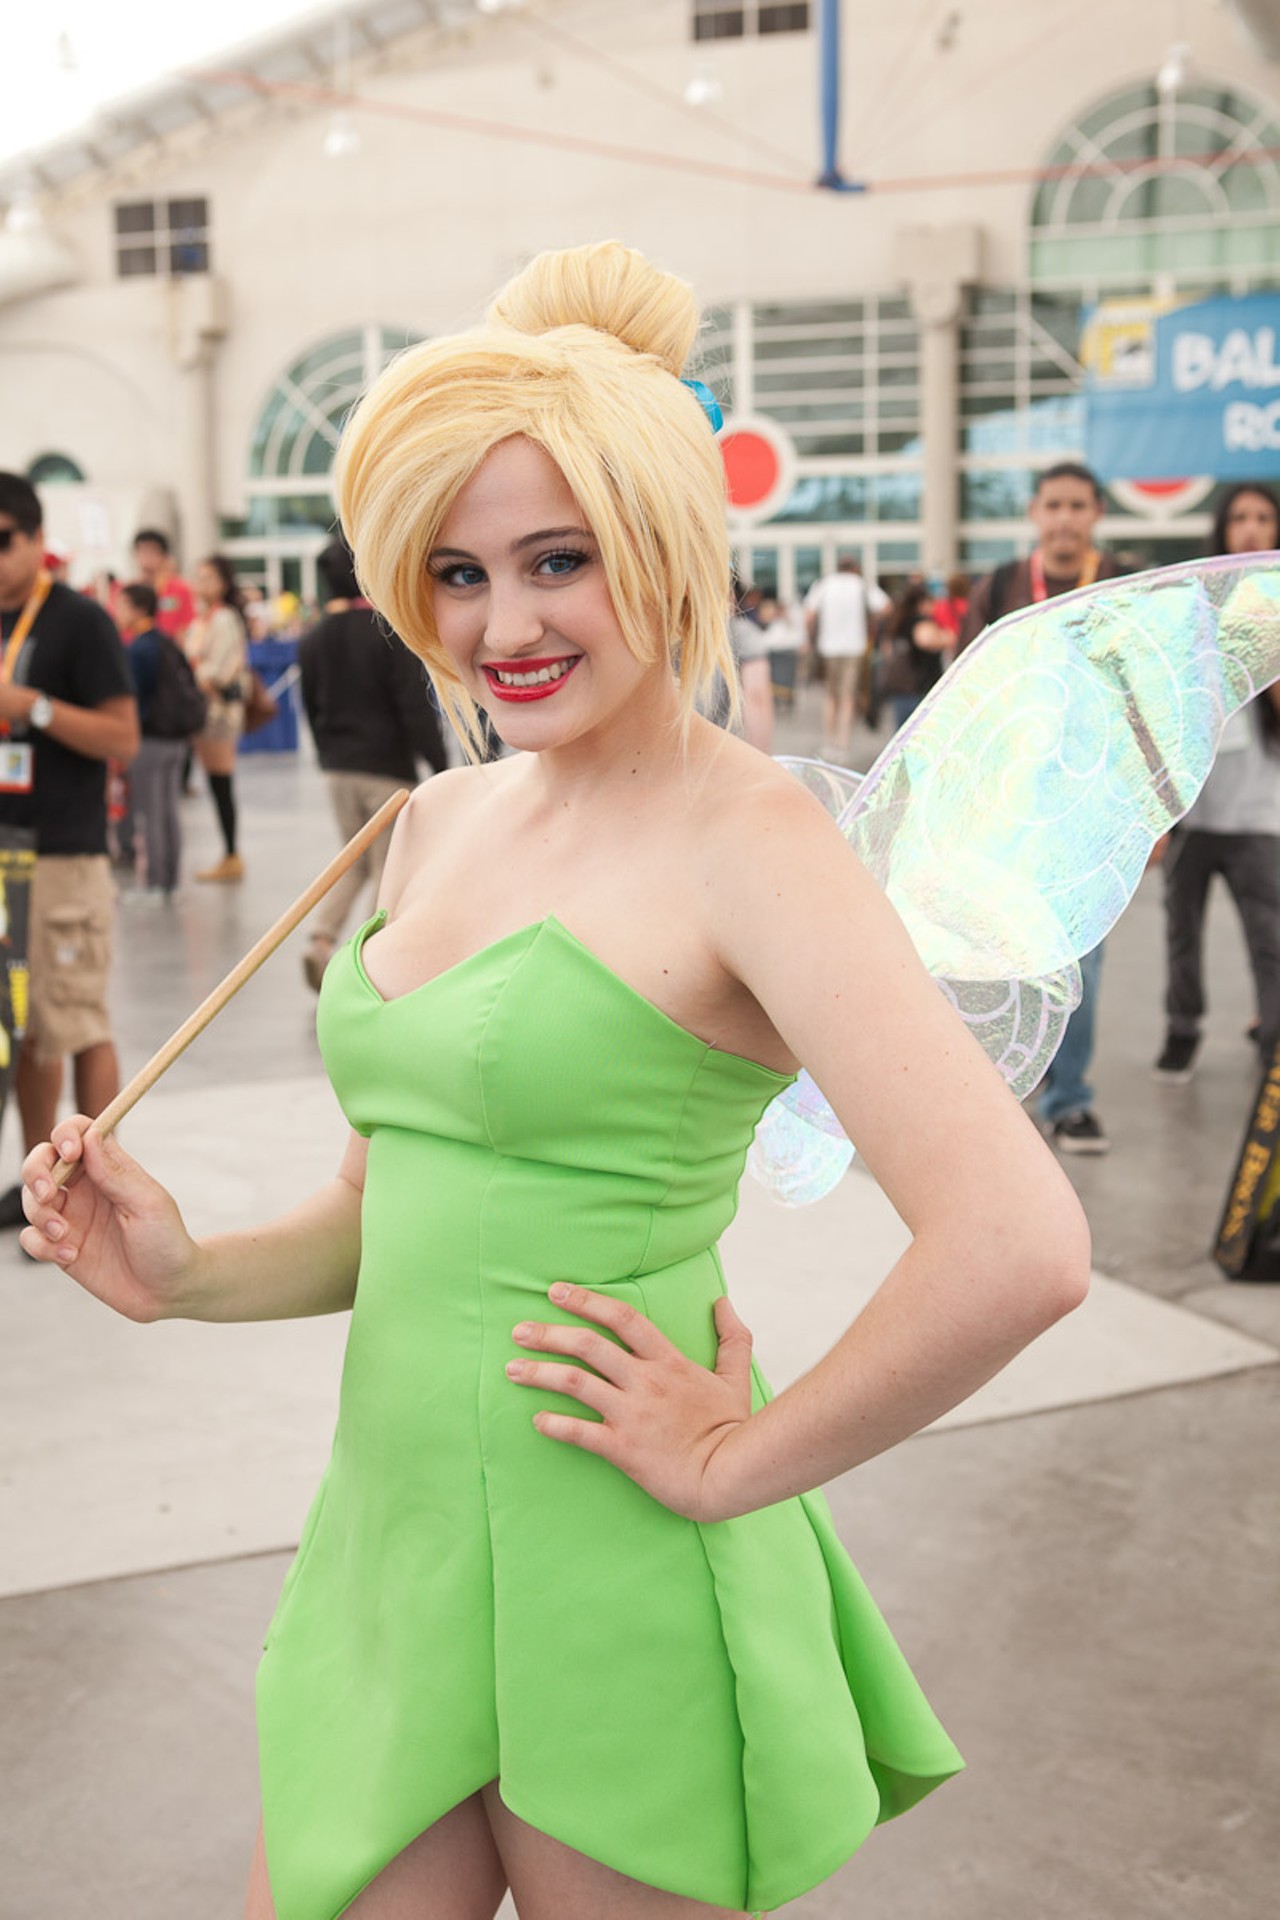 Cosplay on Display at Comic-Con 2012